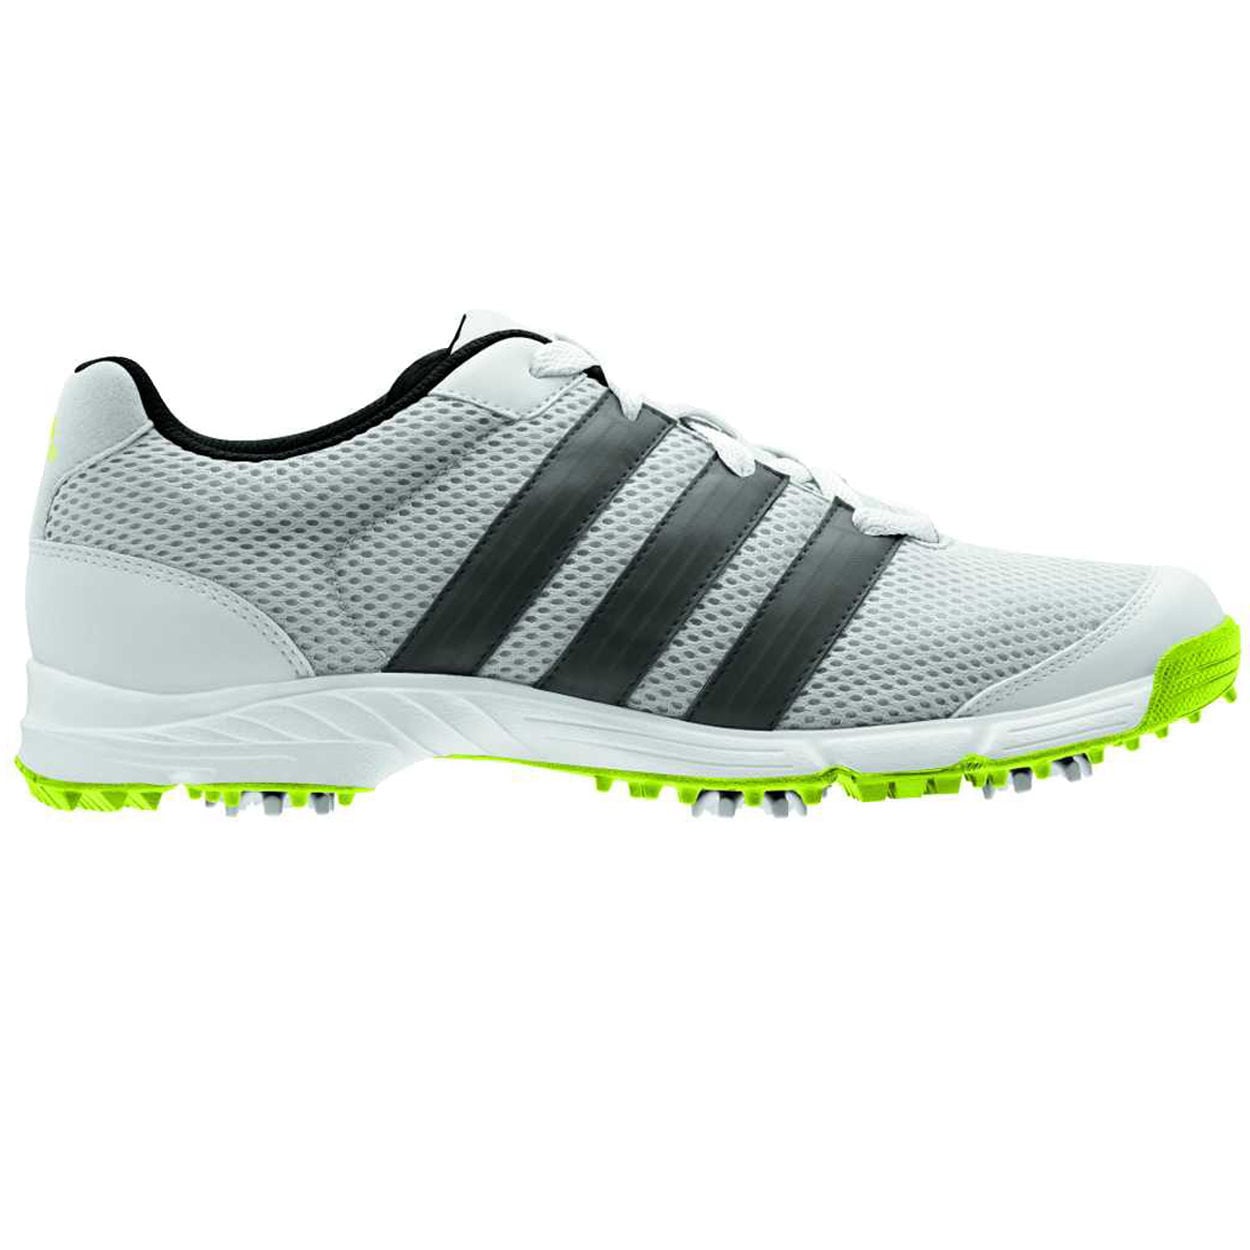 adidas climacool golf shoes 12.5